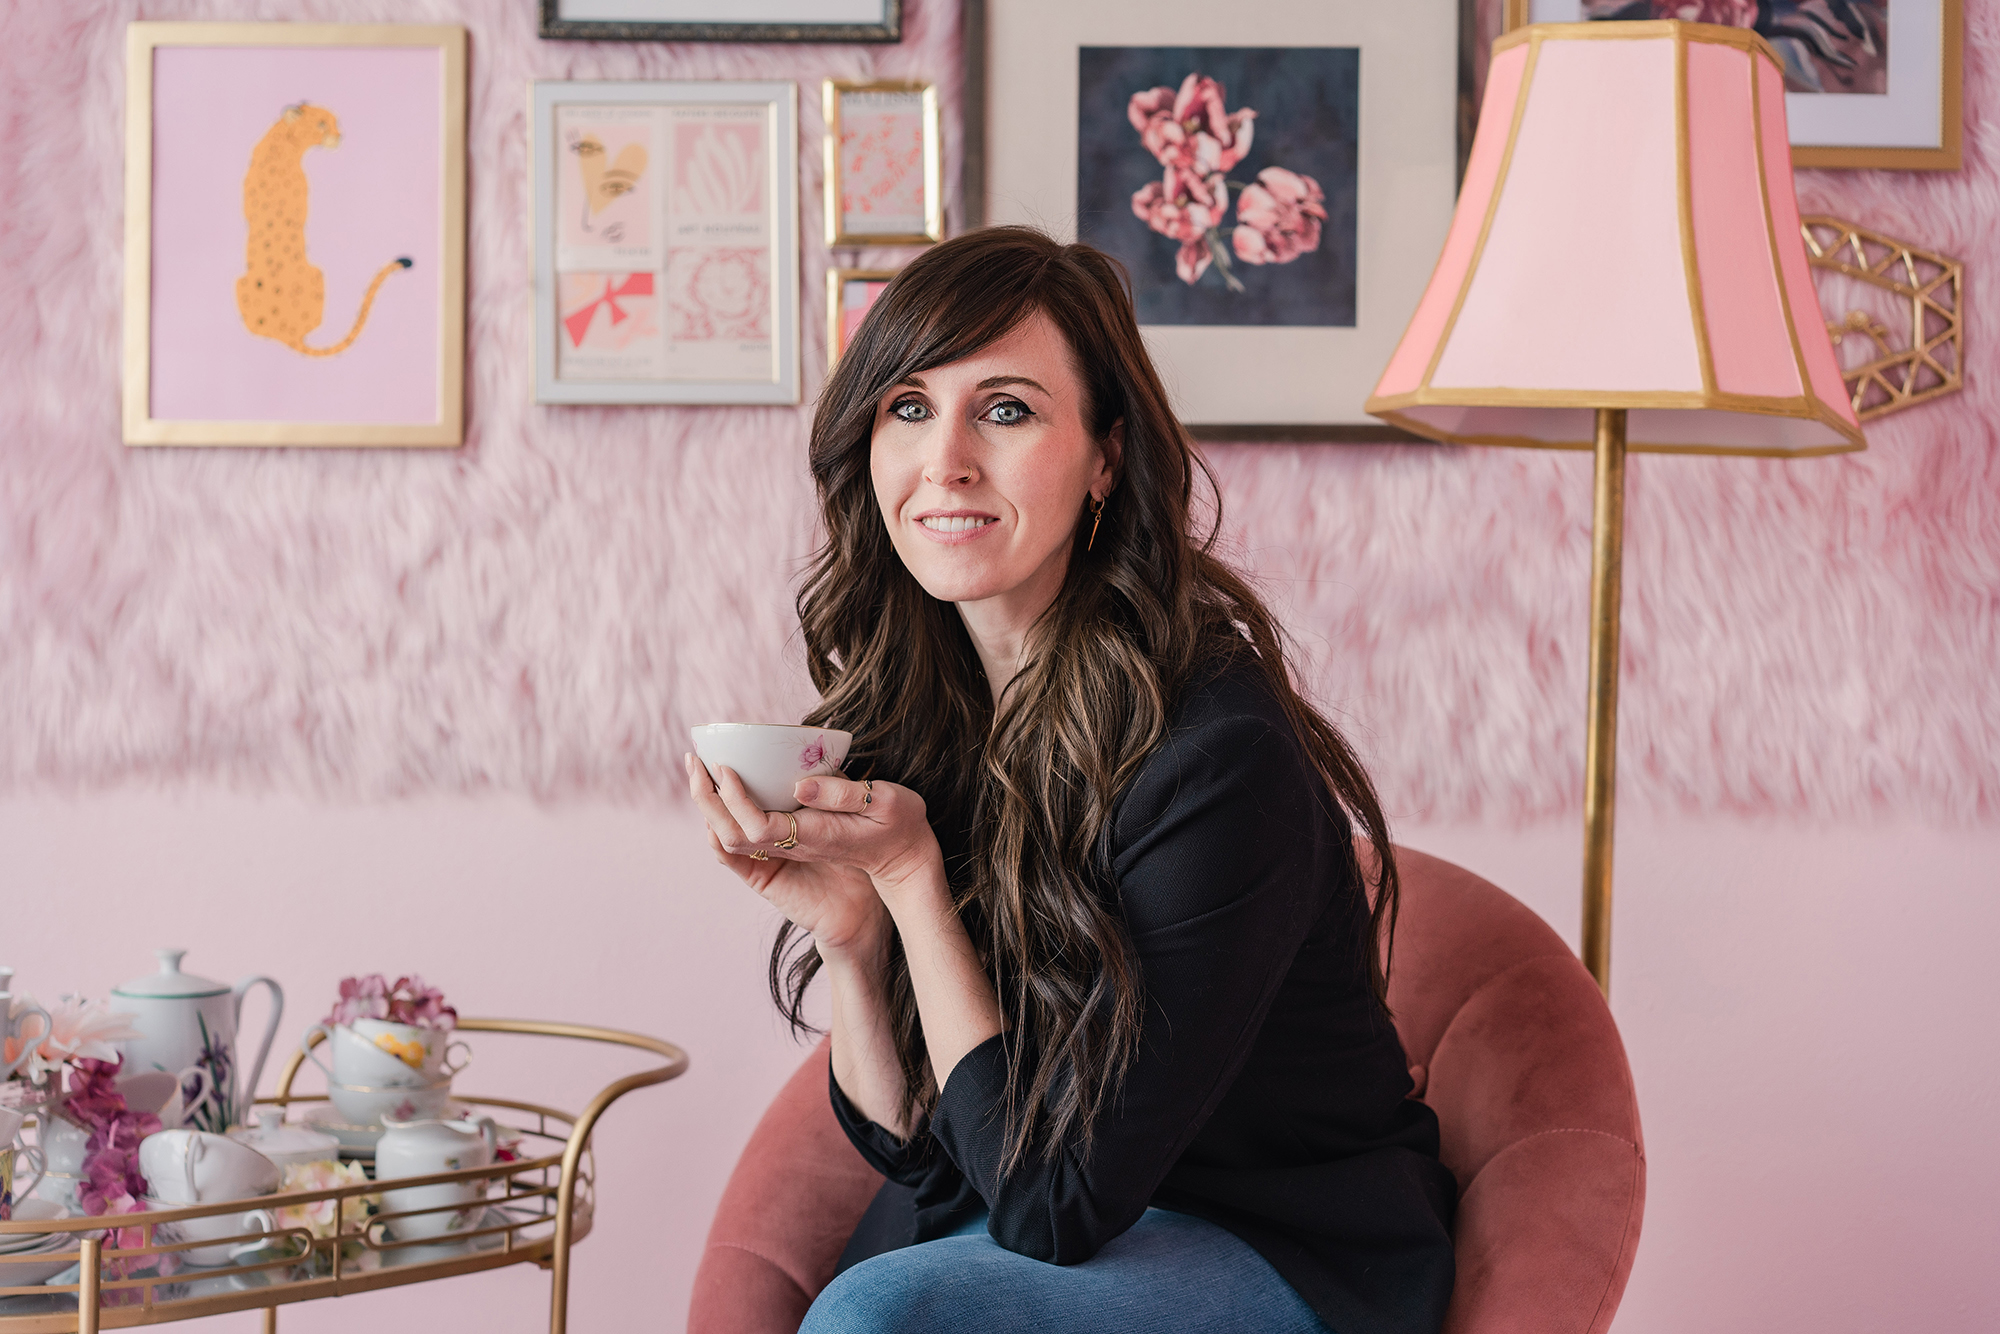 brunette woman sits on pink chair holding teacup in room decorated in pink